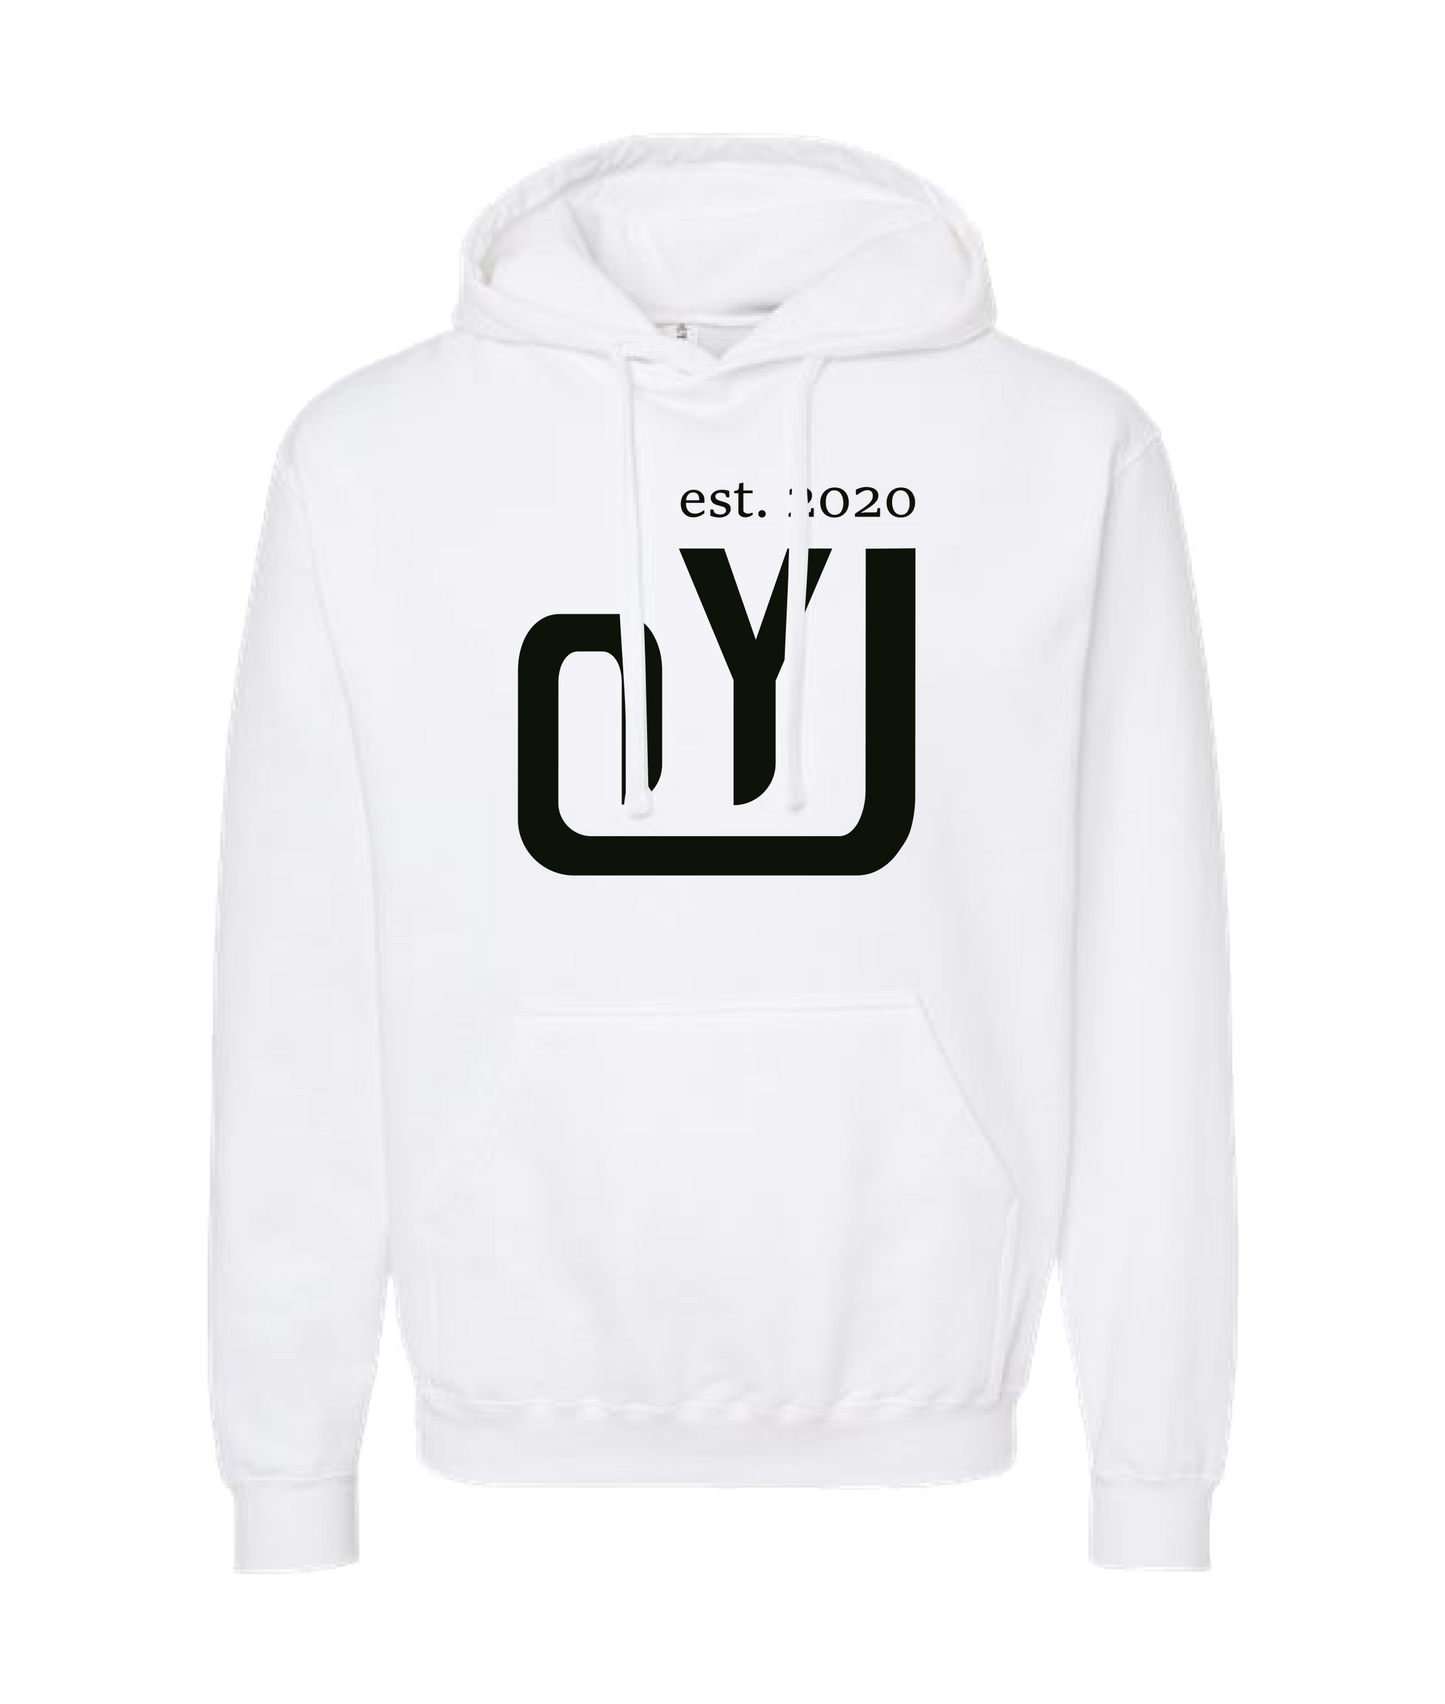 OY Jerky - Submark Color - White Hoodie